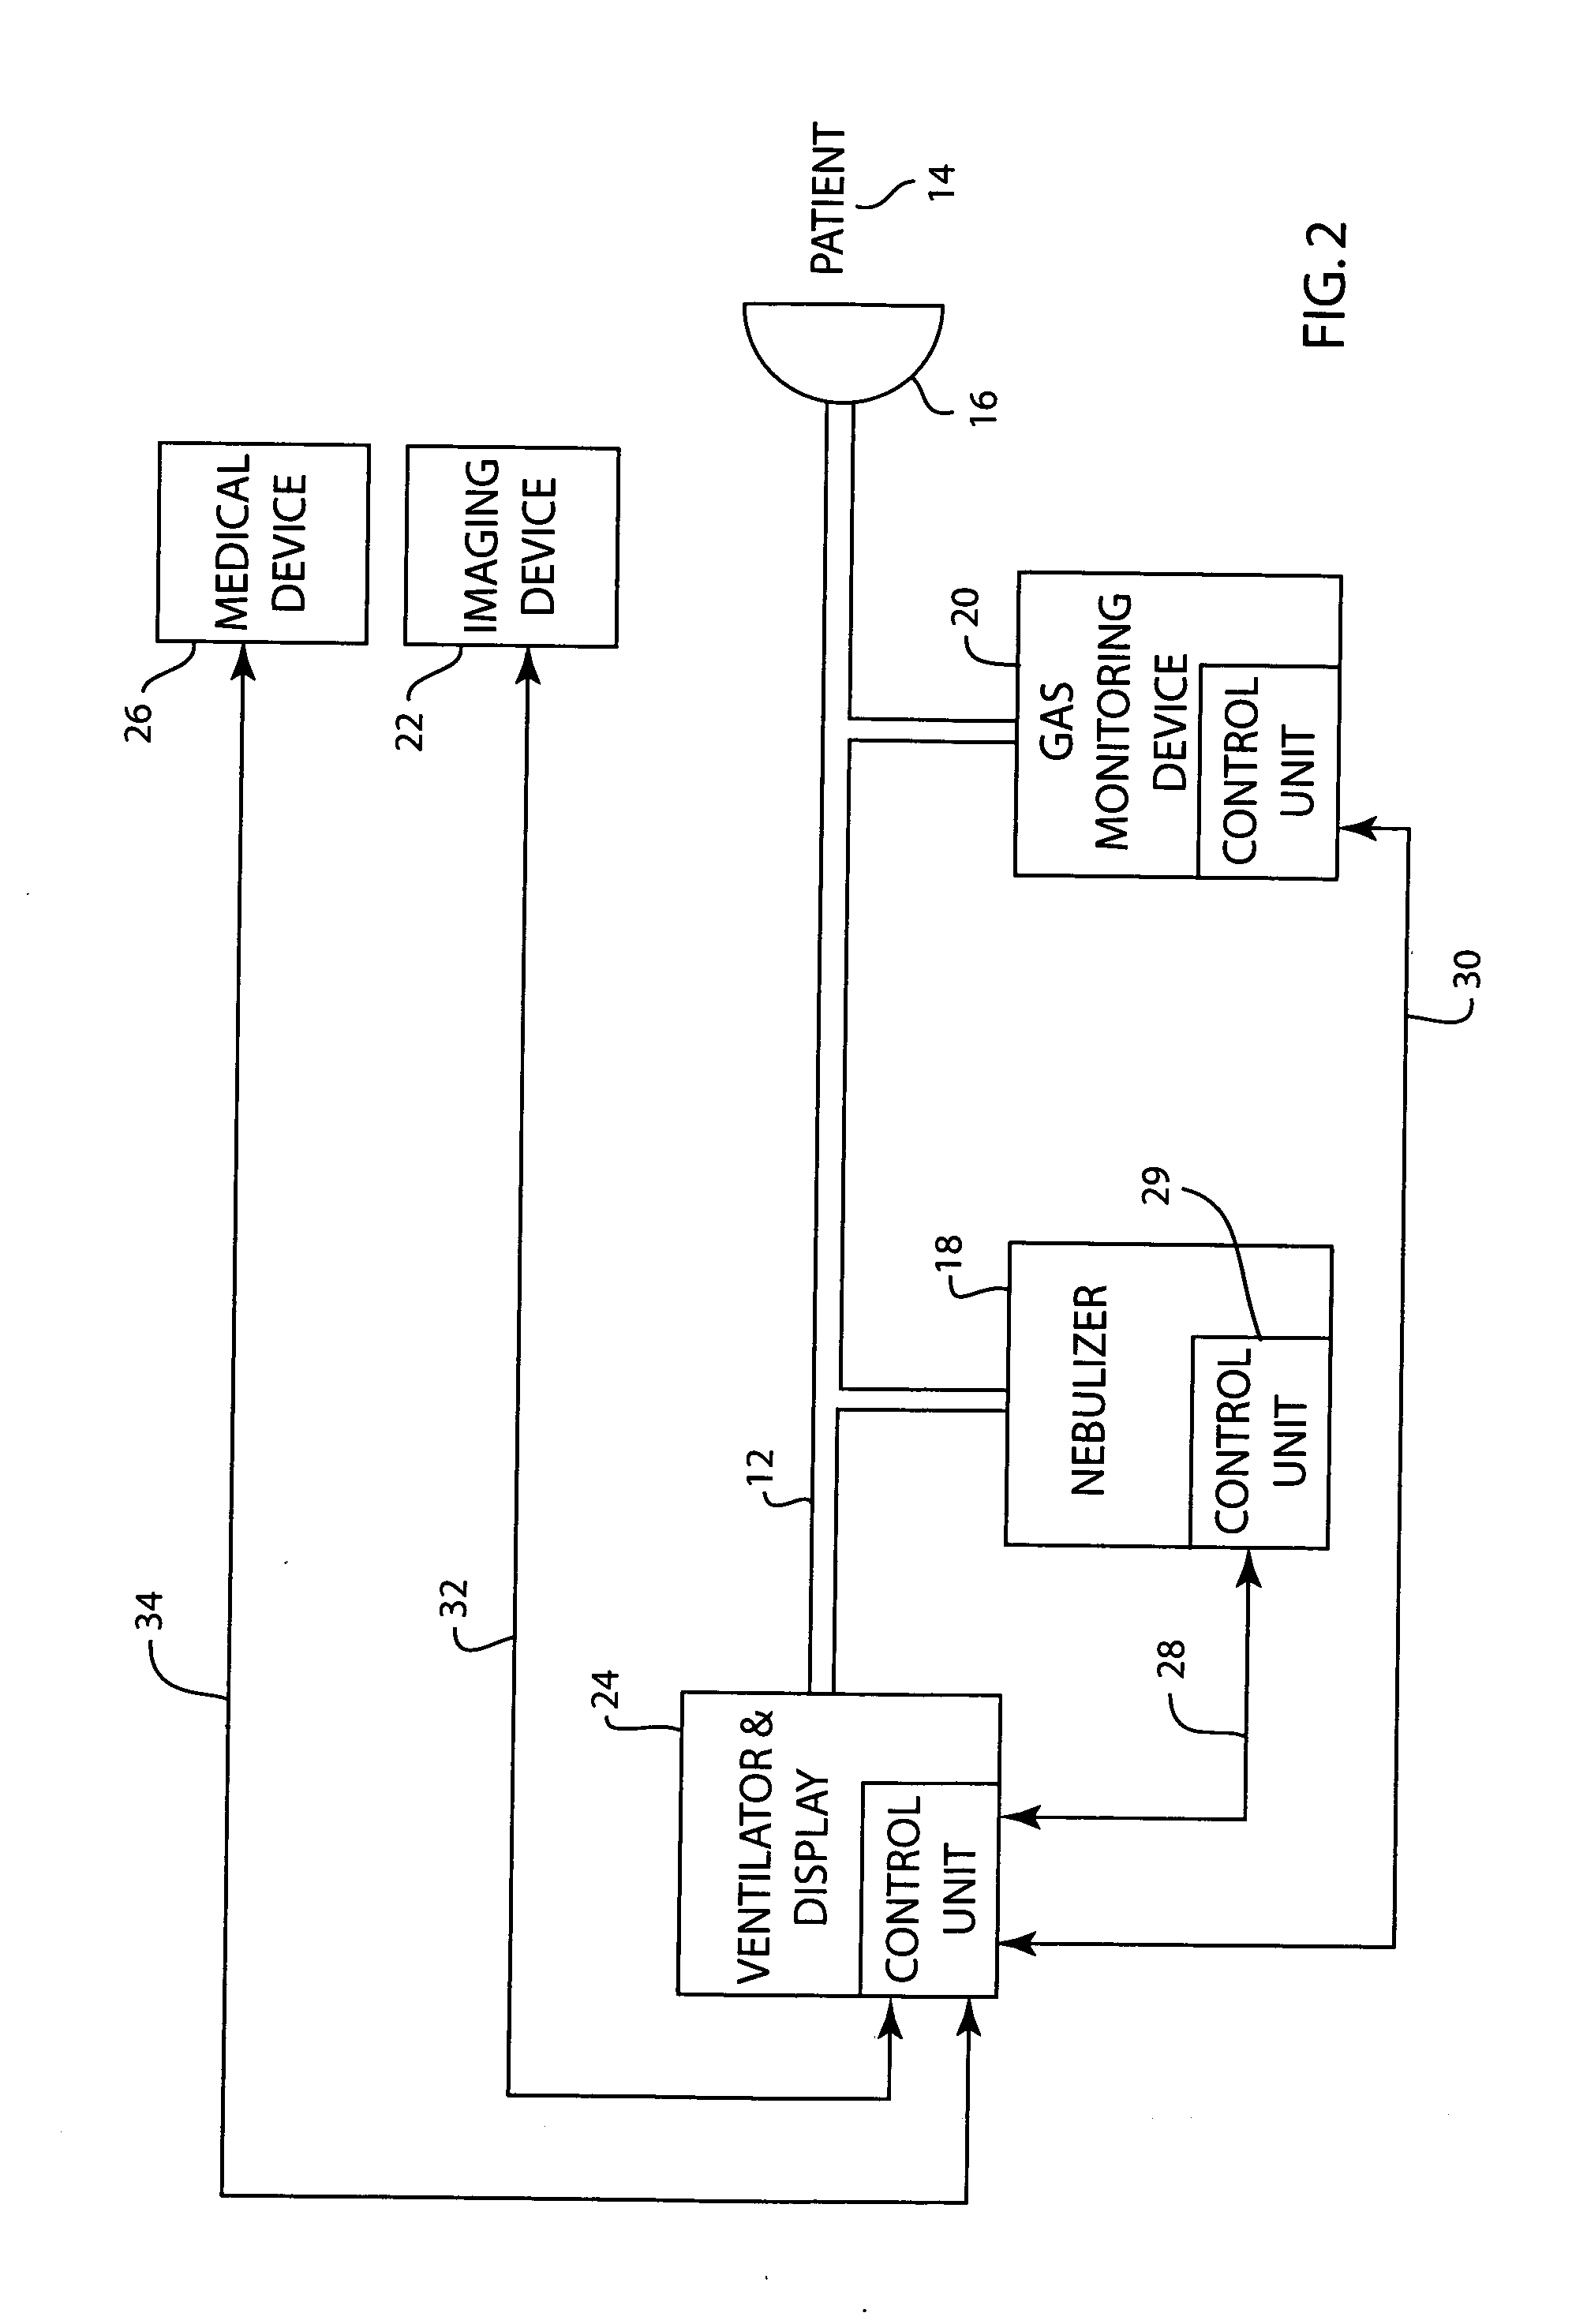 Method and system for integrating ventilator and medical device activities